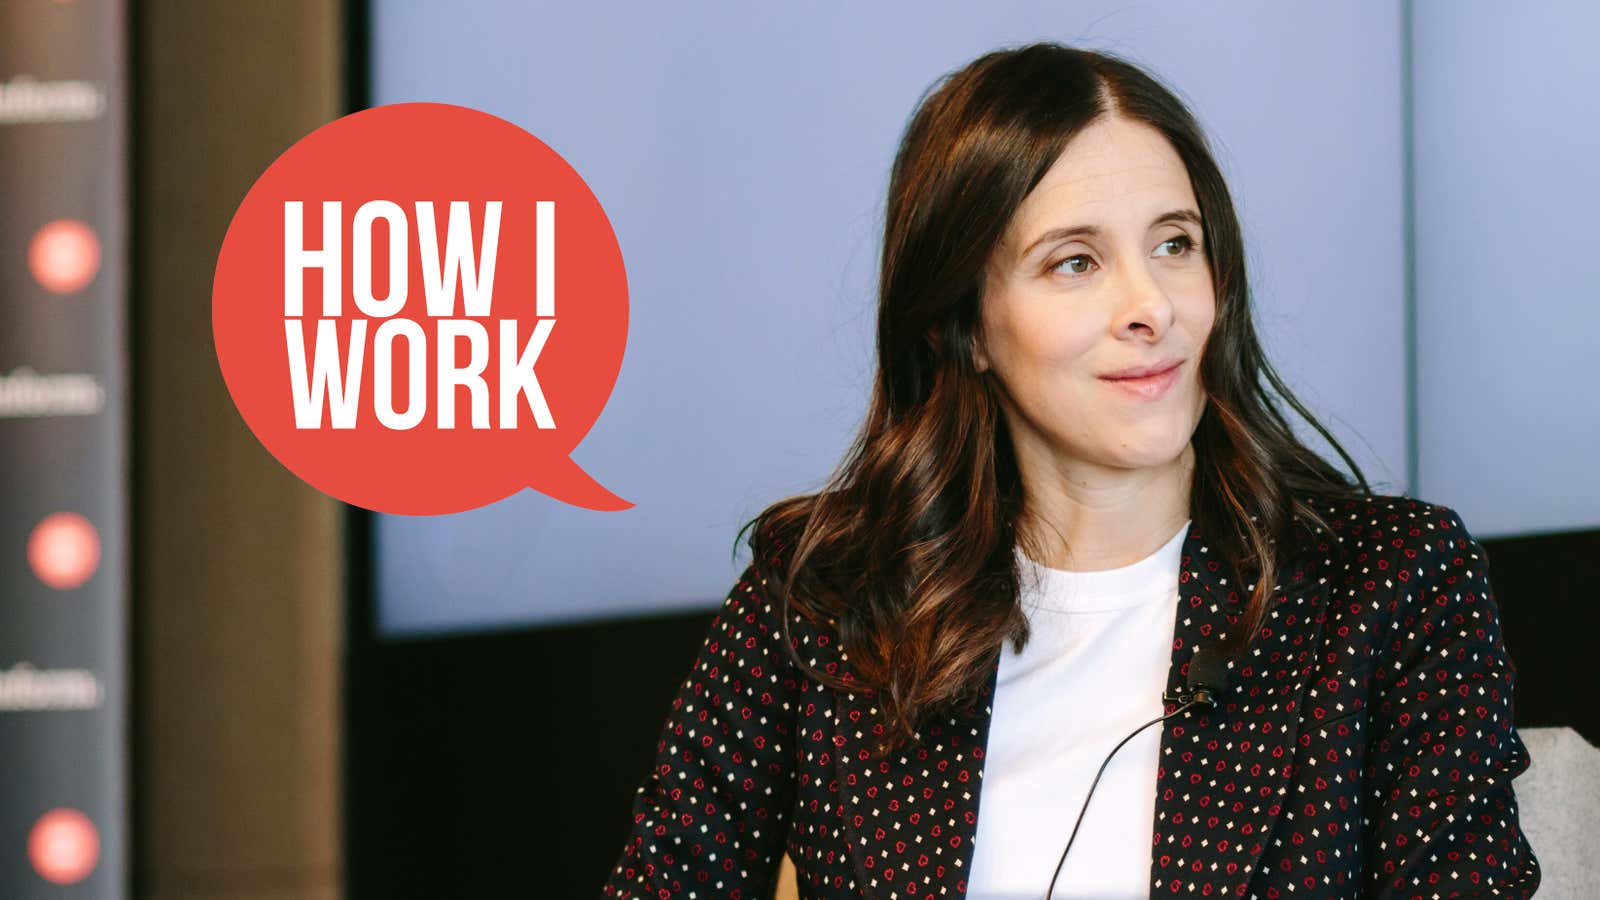 I'm Jessica Lessin, Editor-in-Chief of The Information, and This Is How I Work